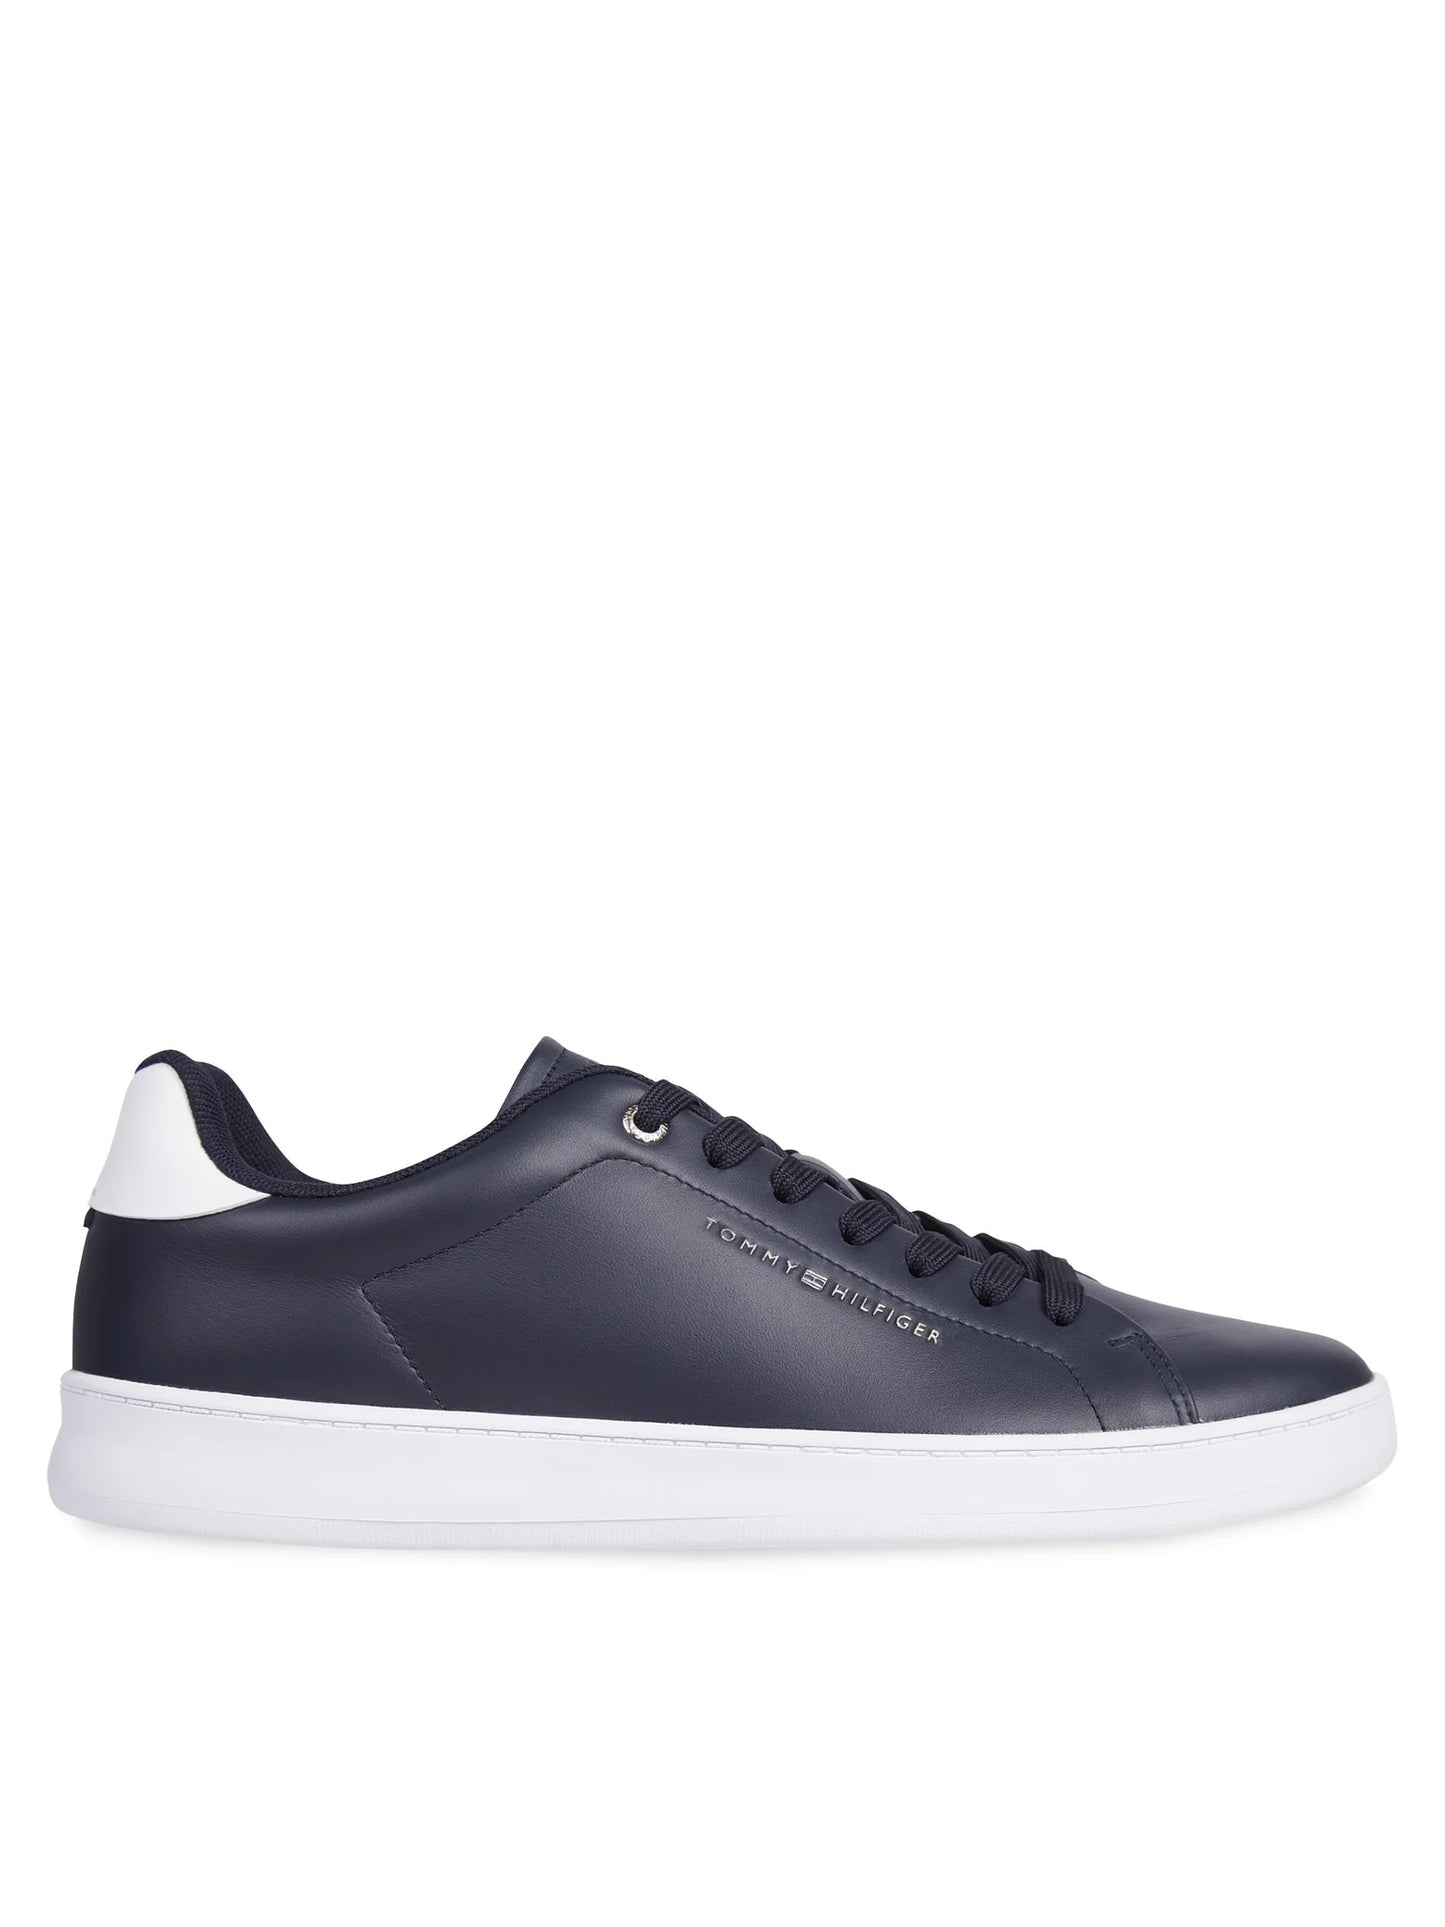 Tommy Hilfiger Contrast Heel Leather Cupsole Trainers